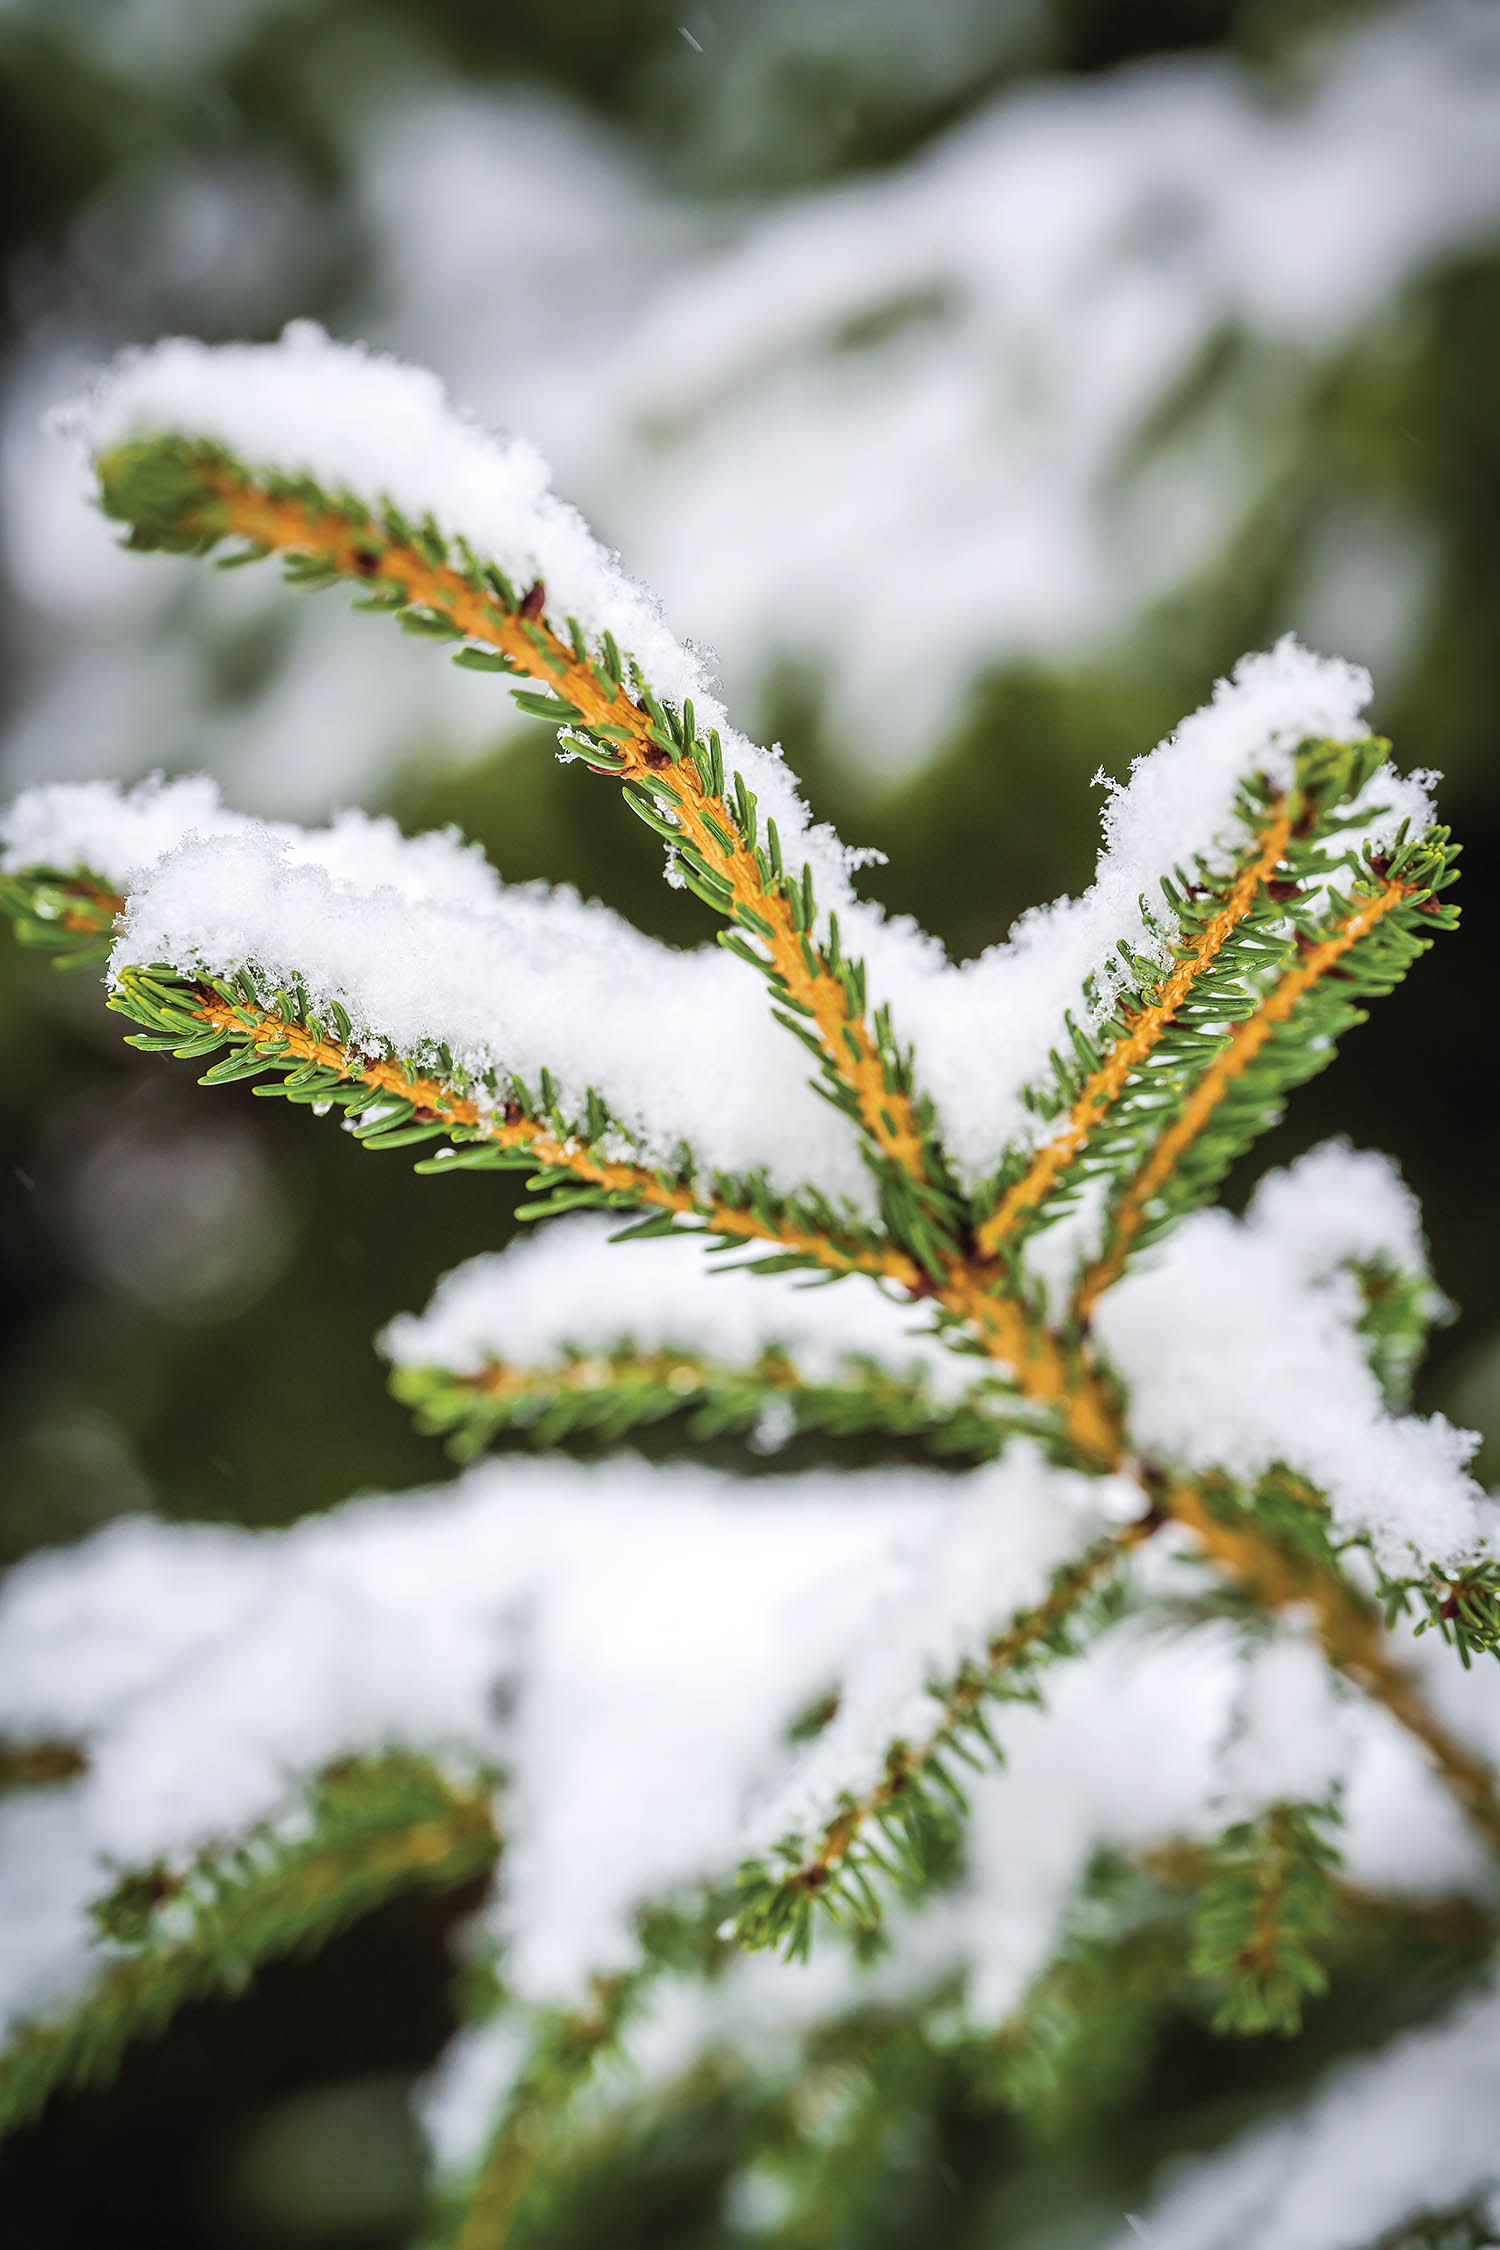 Closeup of snow-dusted pine needles.